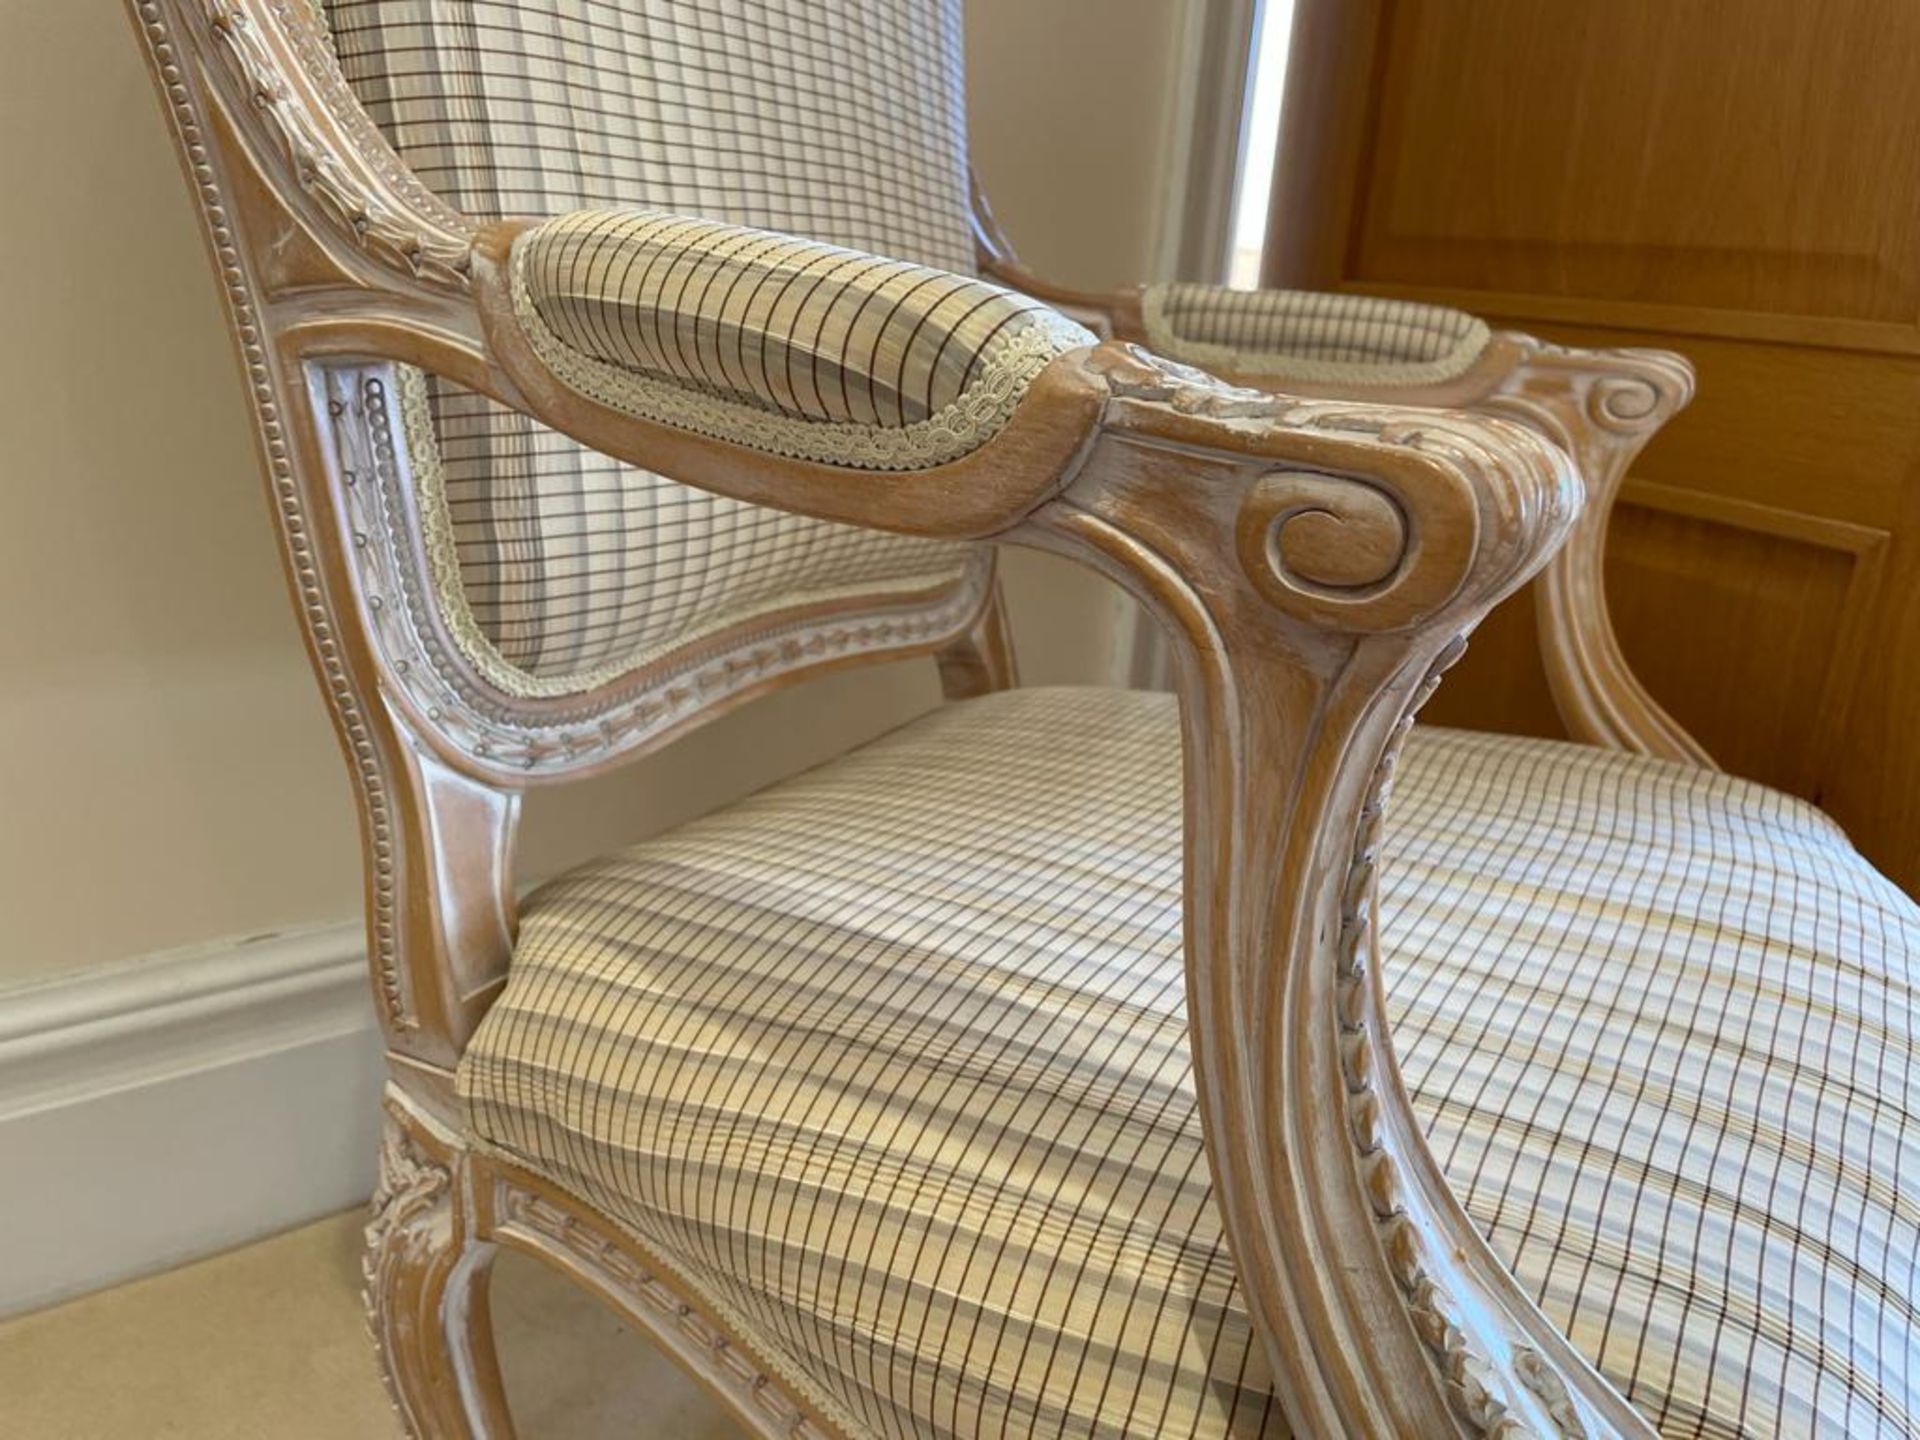 Pair of French Shabby Chic Bedroom Chairs - Stunning Carved Wood Chair Upholstered With Striped - Image 16 of 16